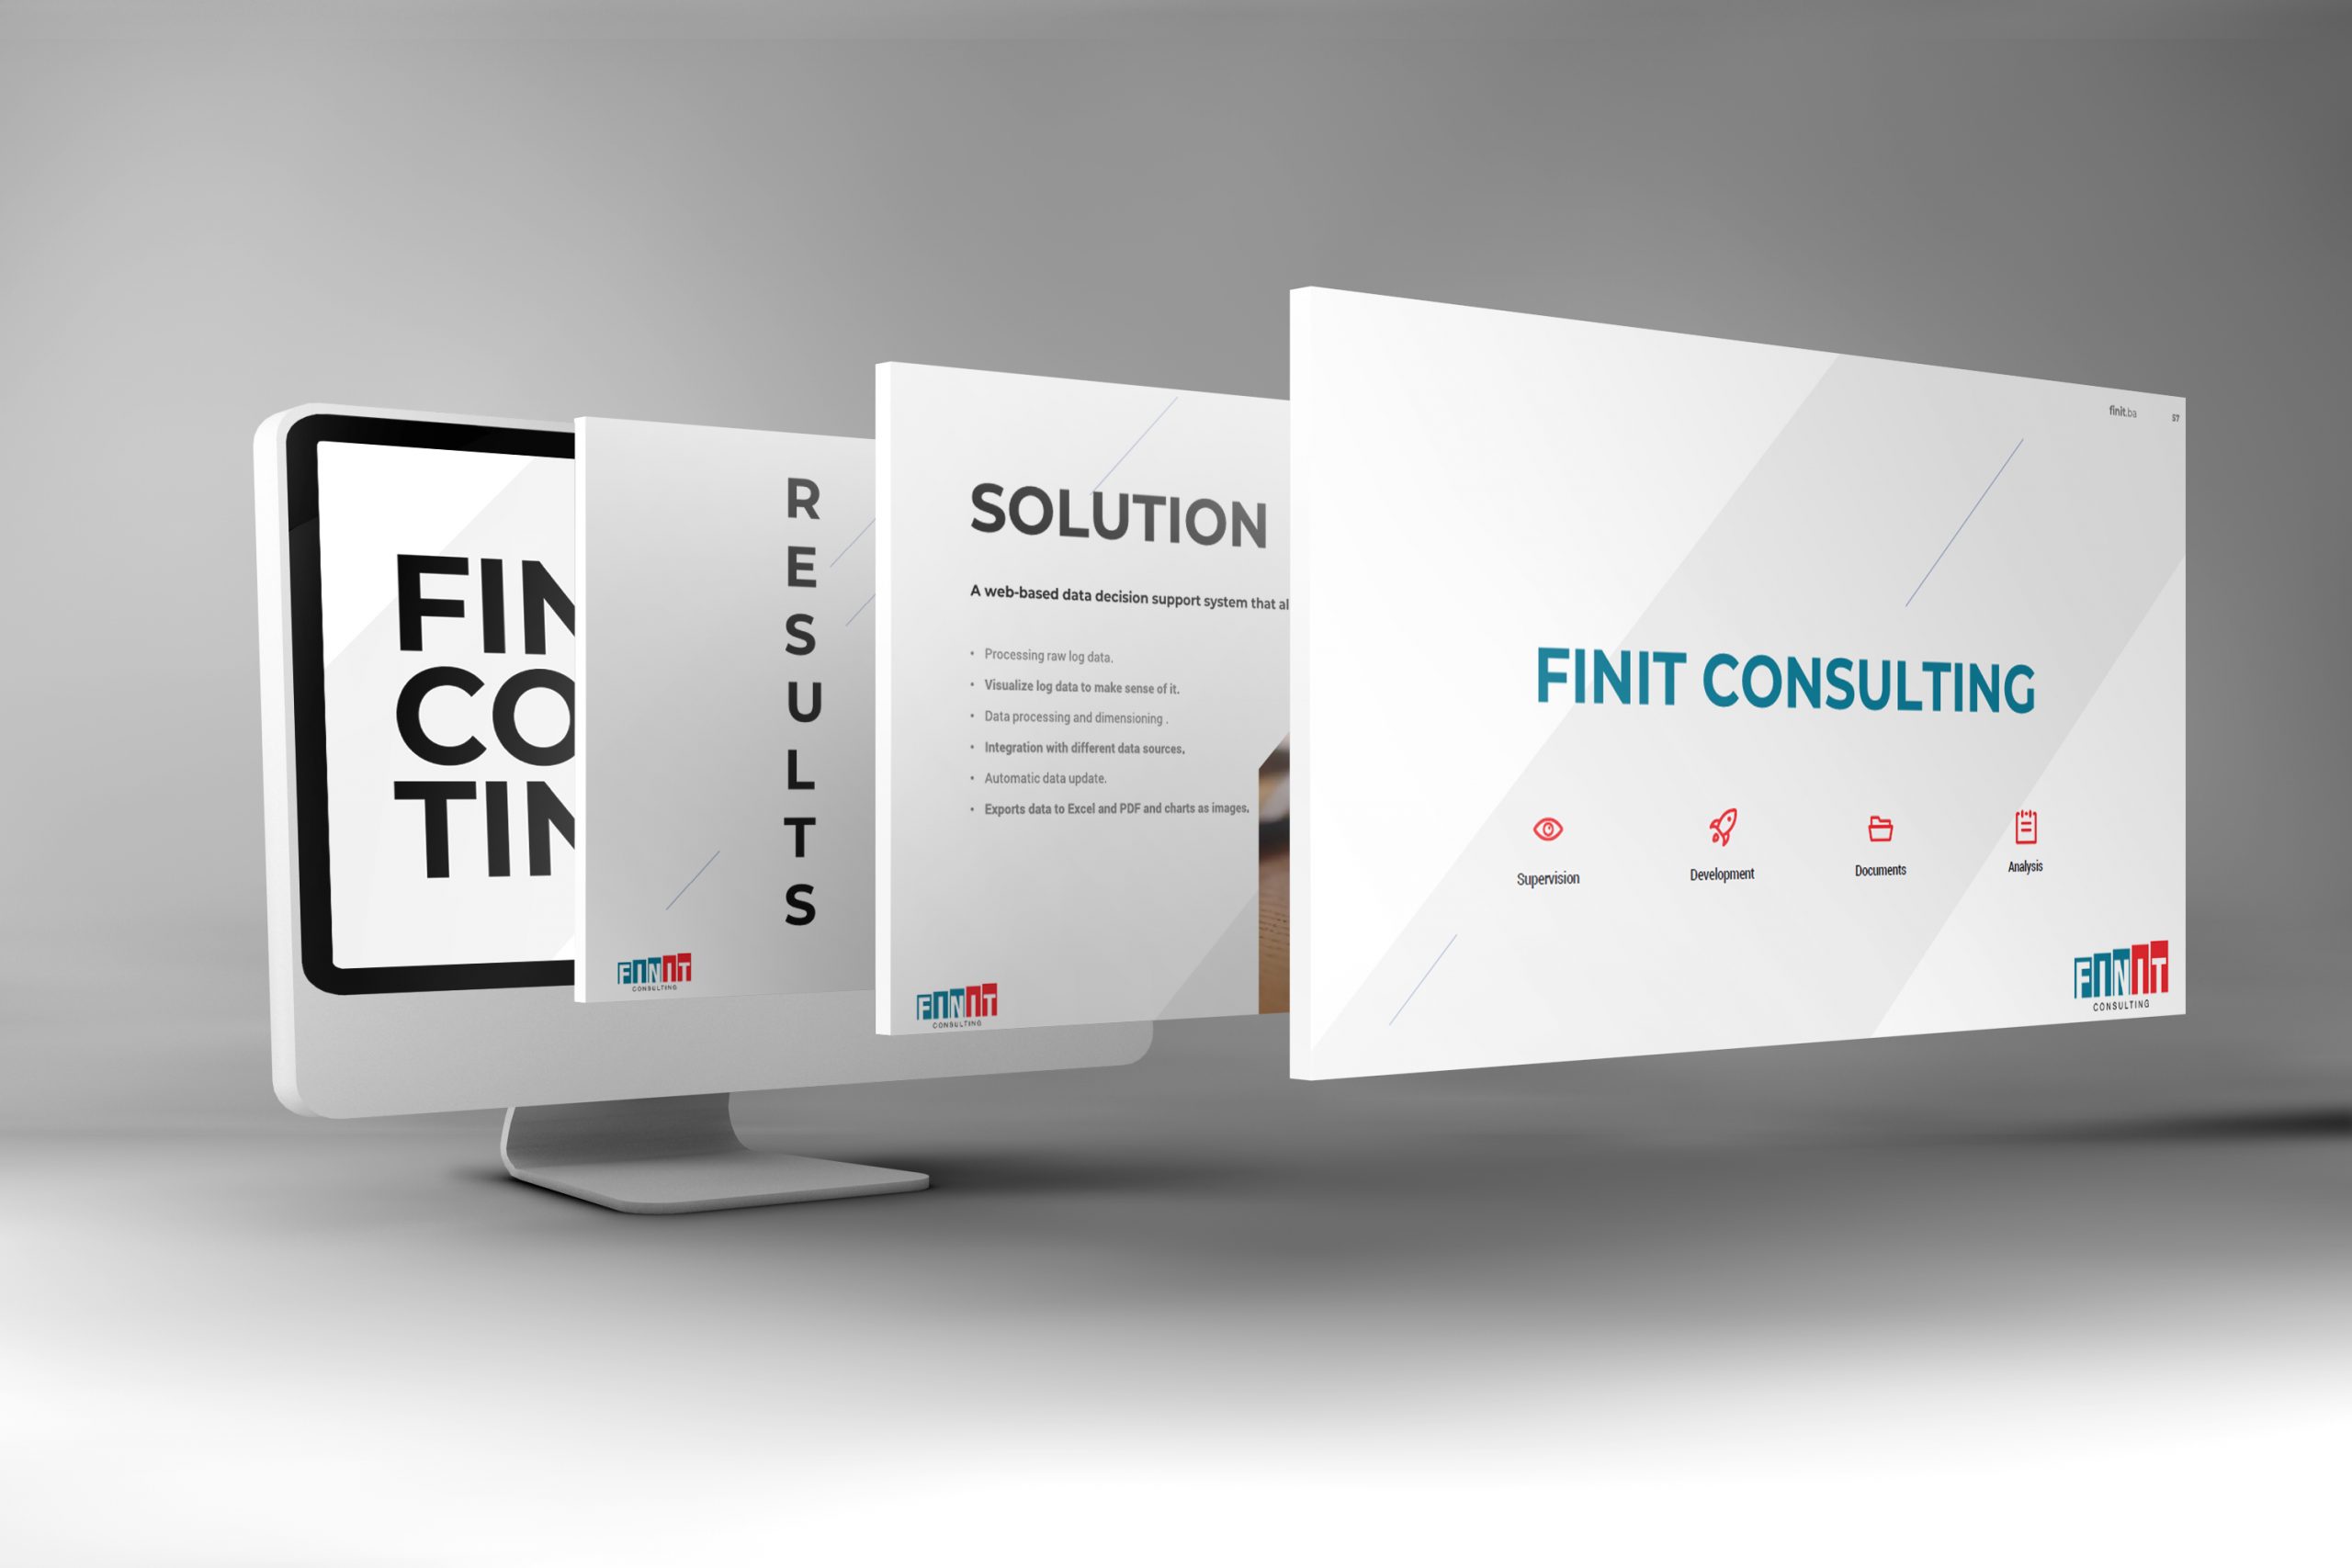 Finit Consulting